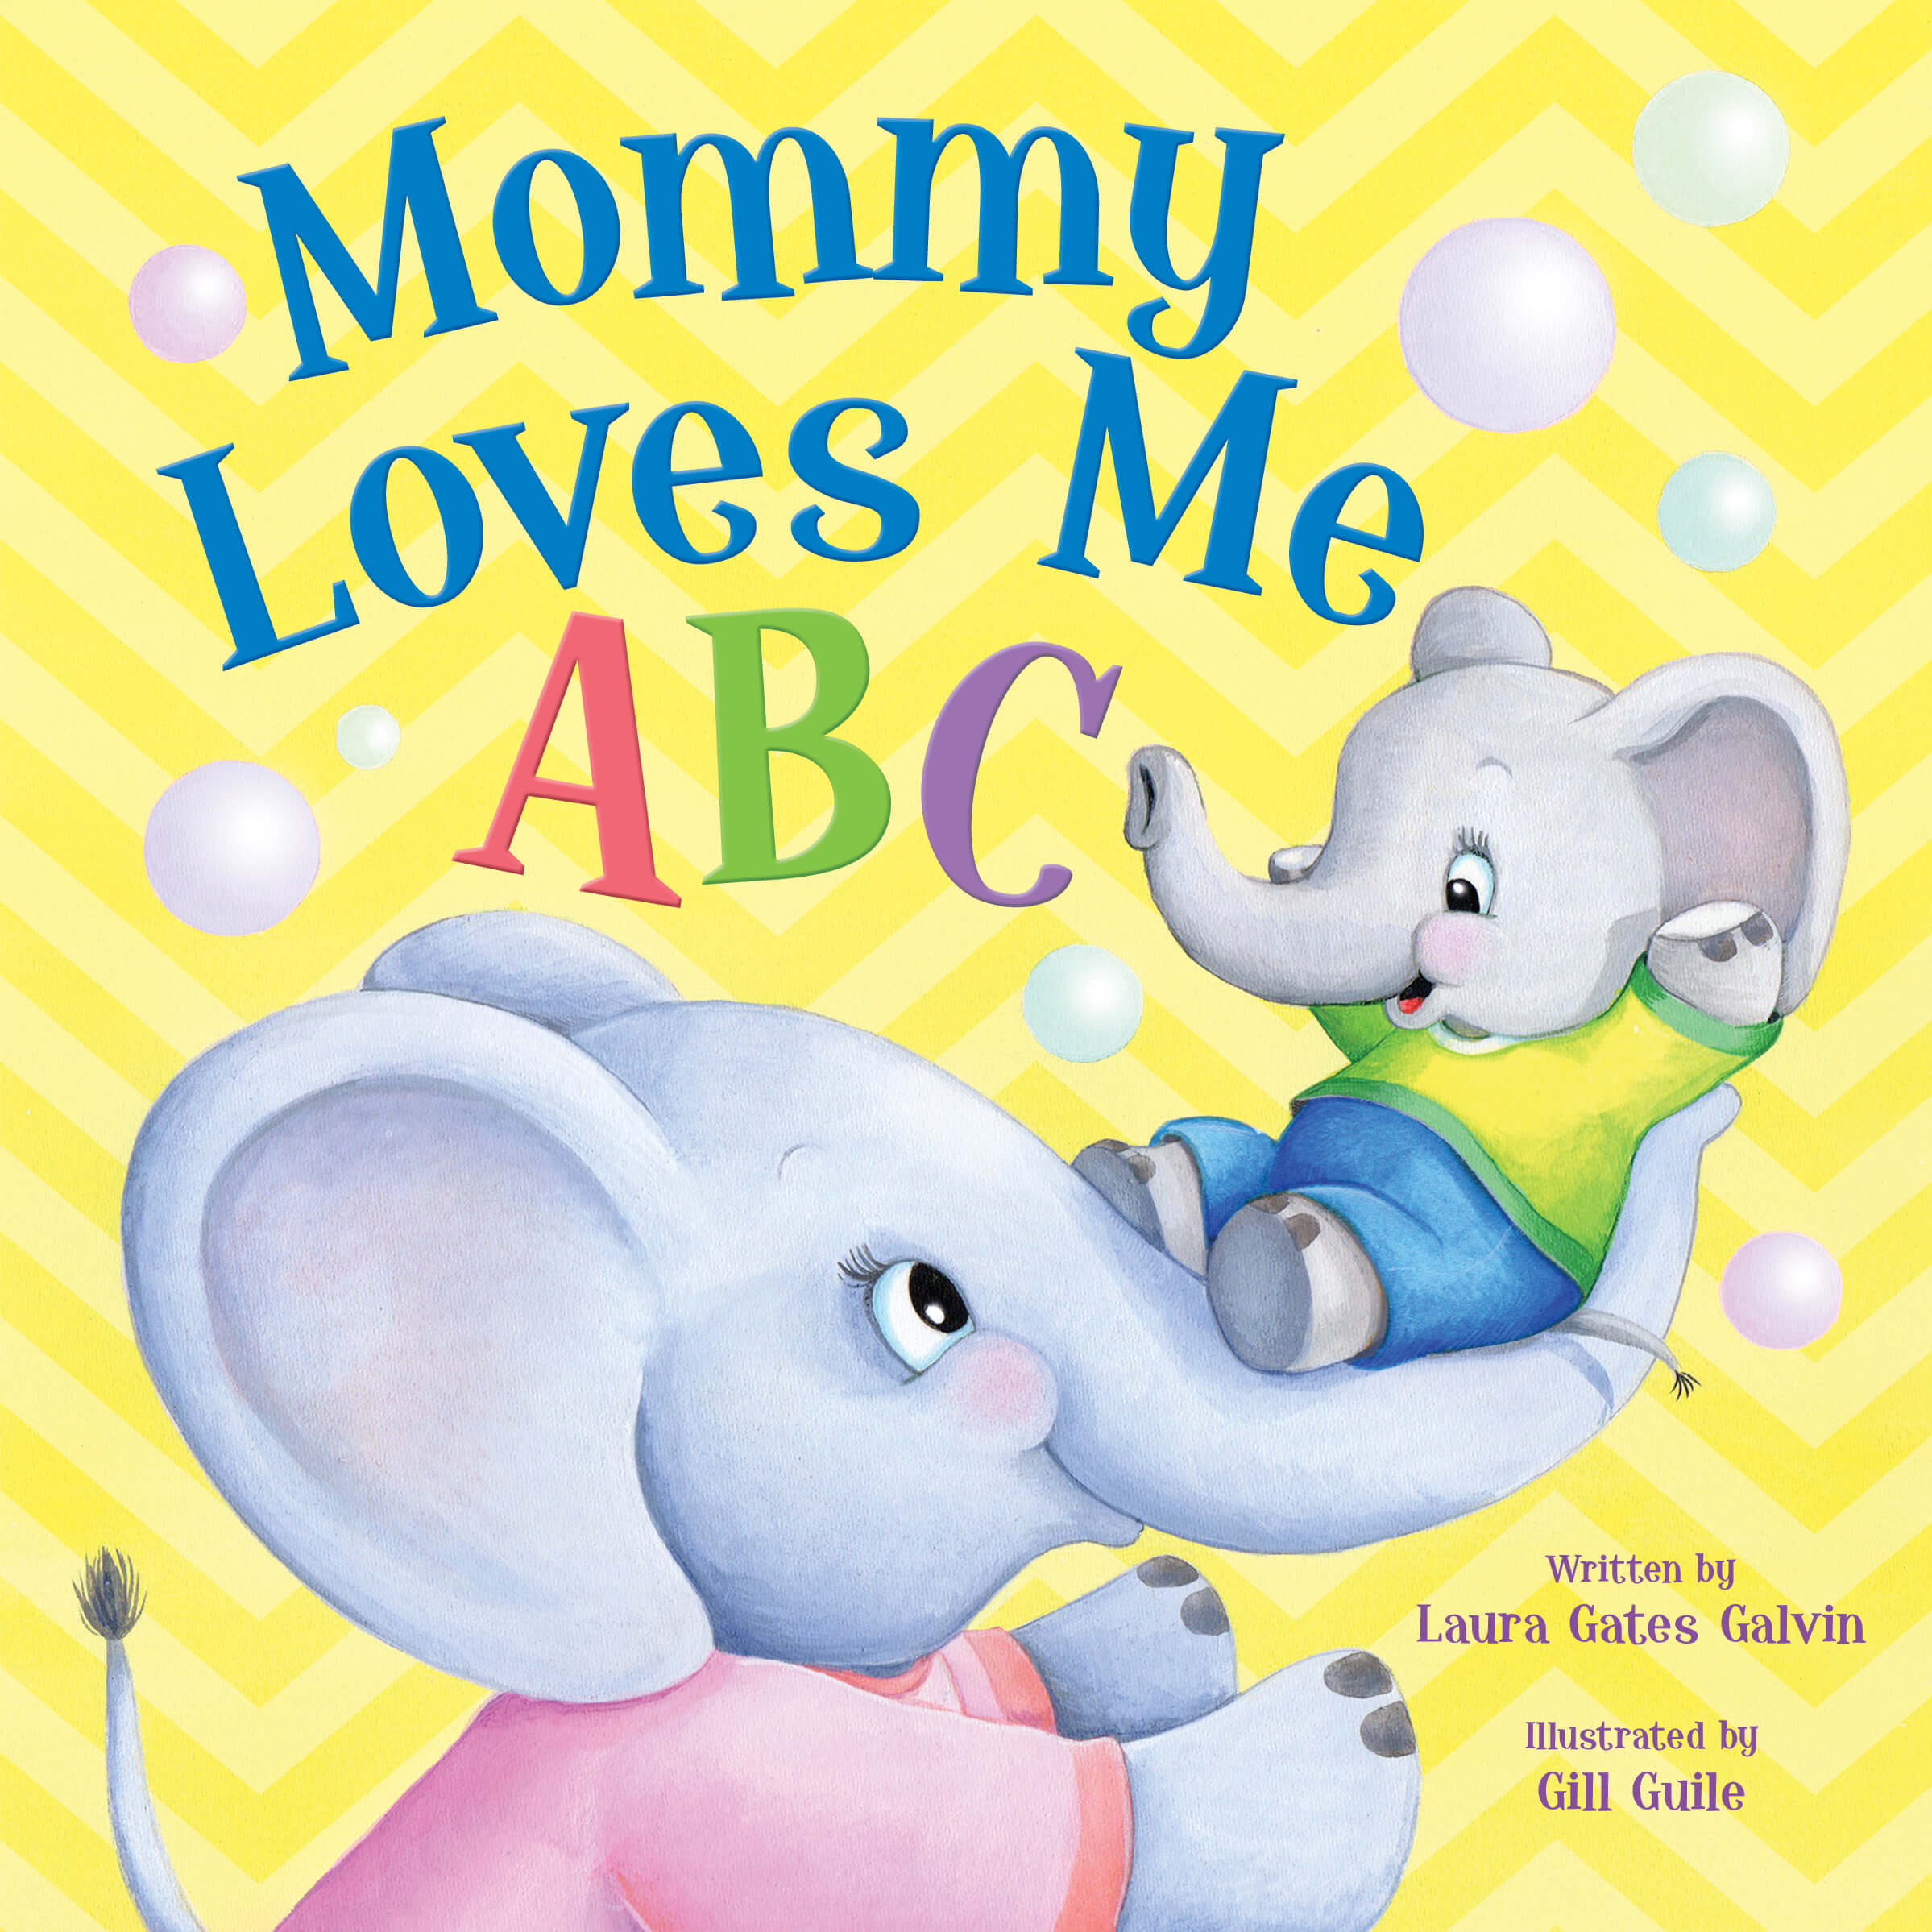 Mommy Loves Me ABC